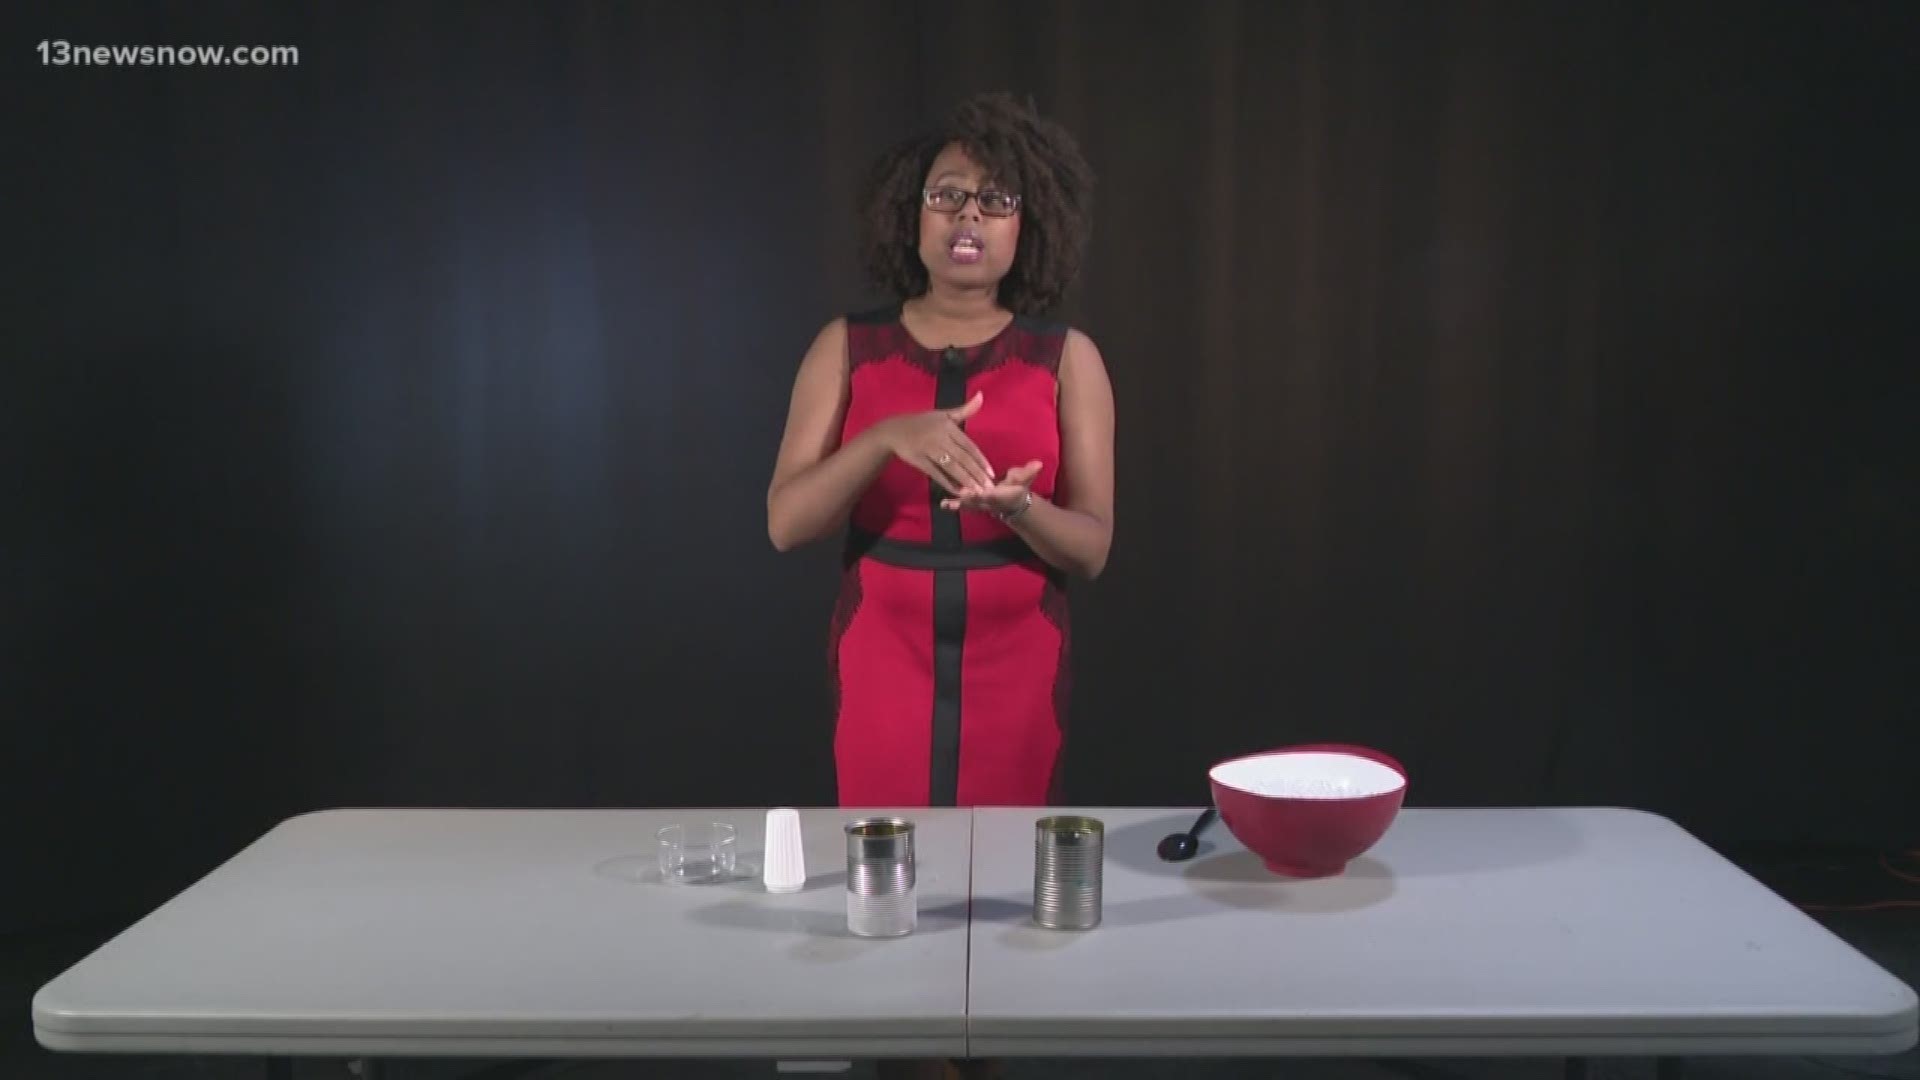 Rachael Peart shows us a chilling science experiment you can do at home!